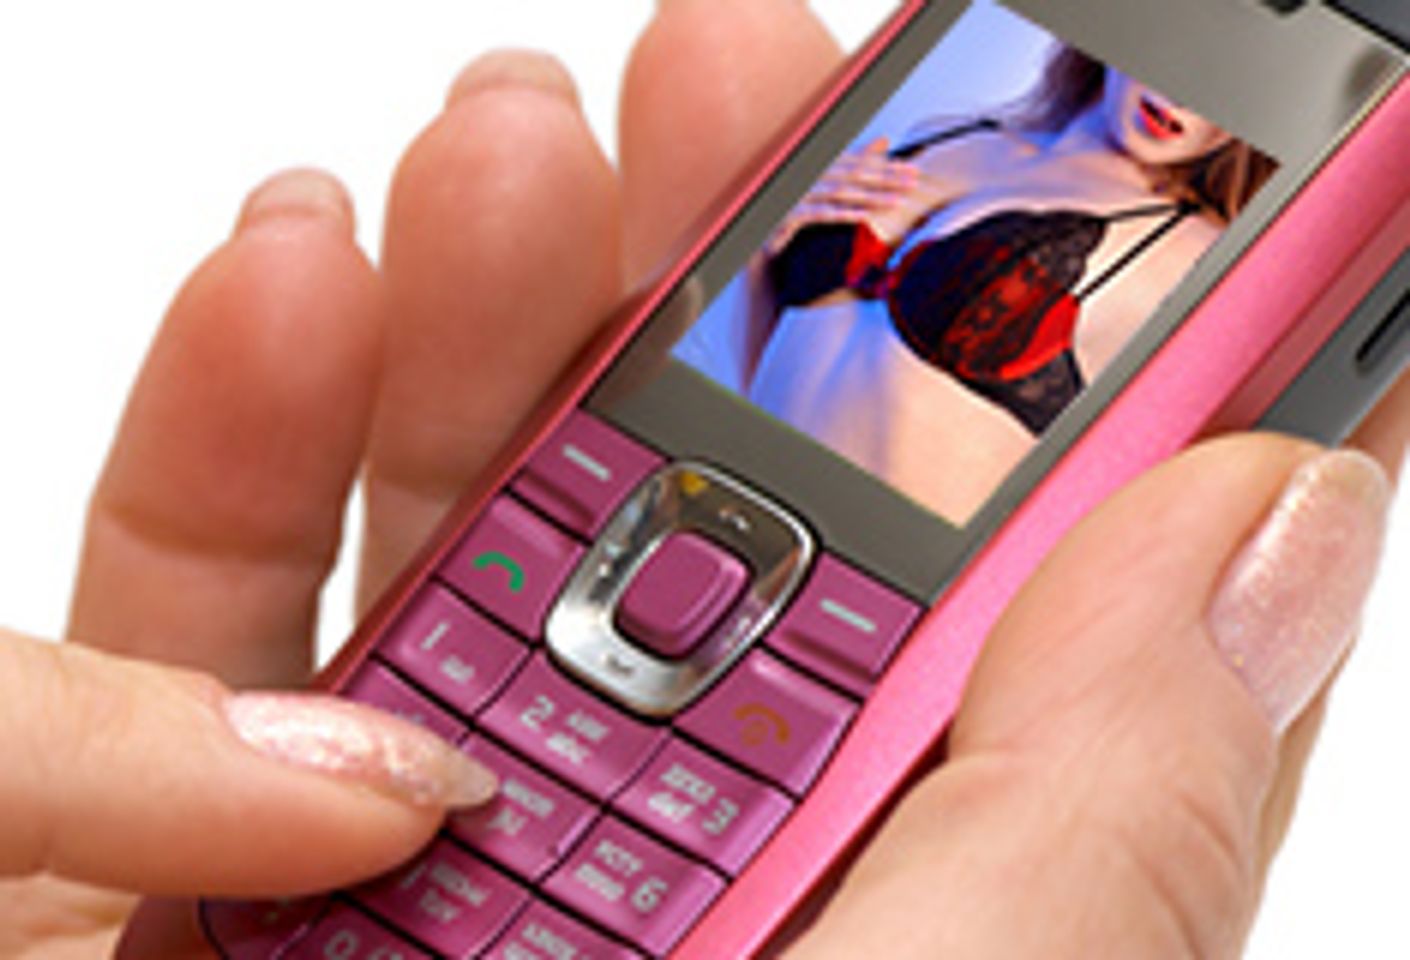 Study: Mobile-Porn Market to Hit $3.5 Billion by 2010